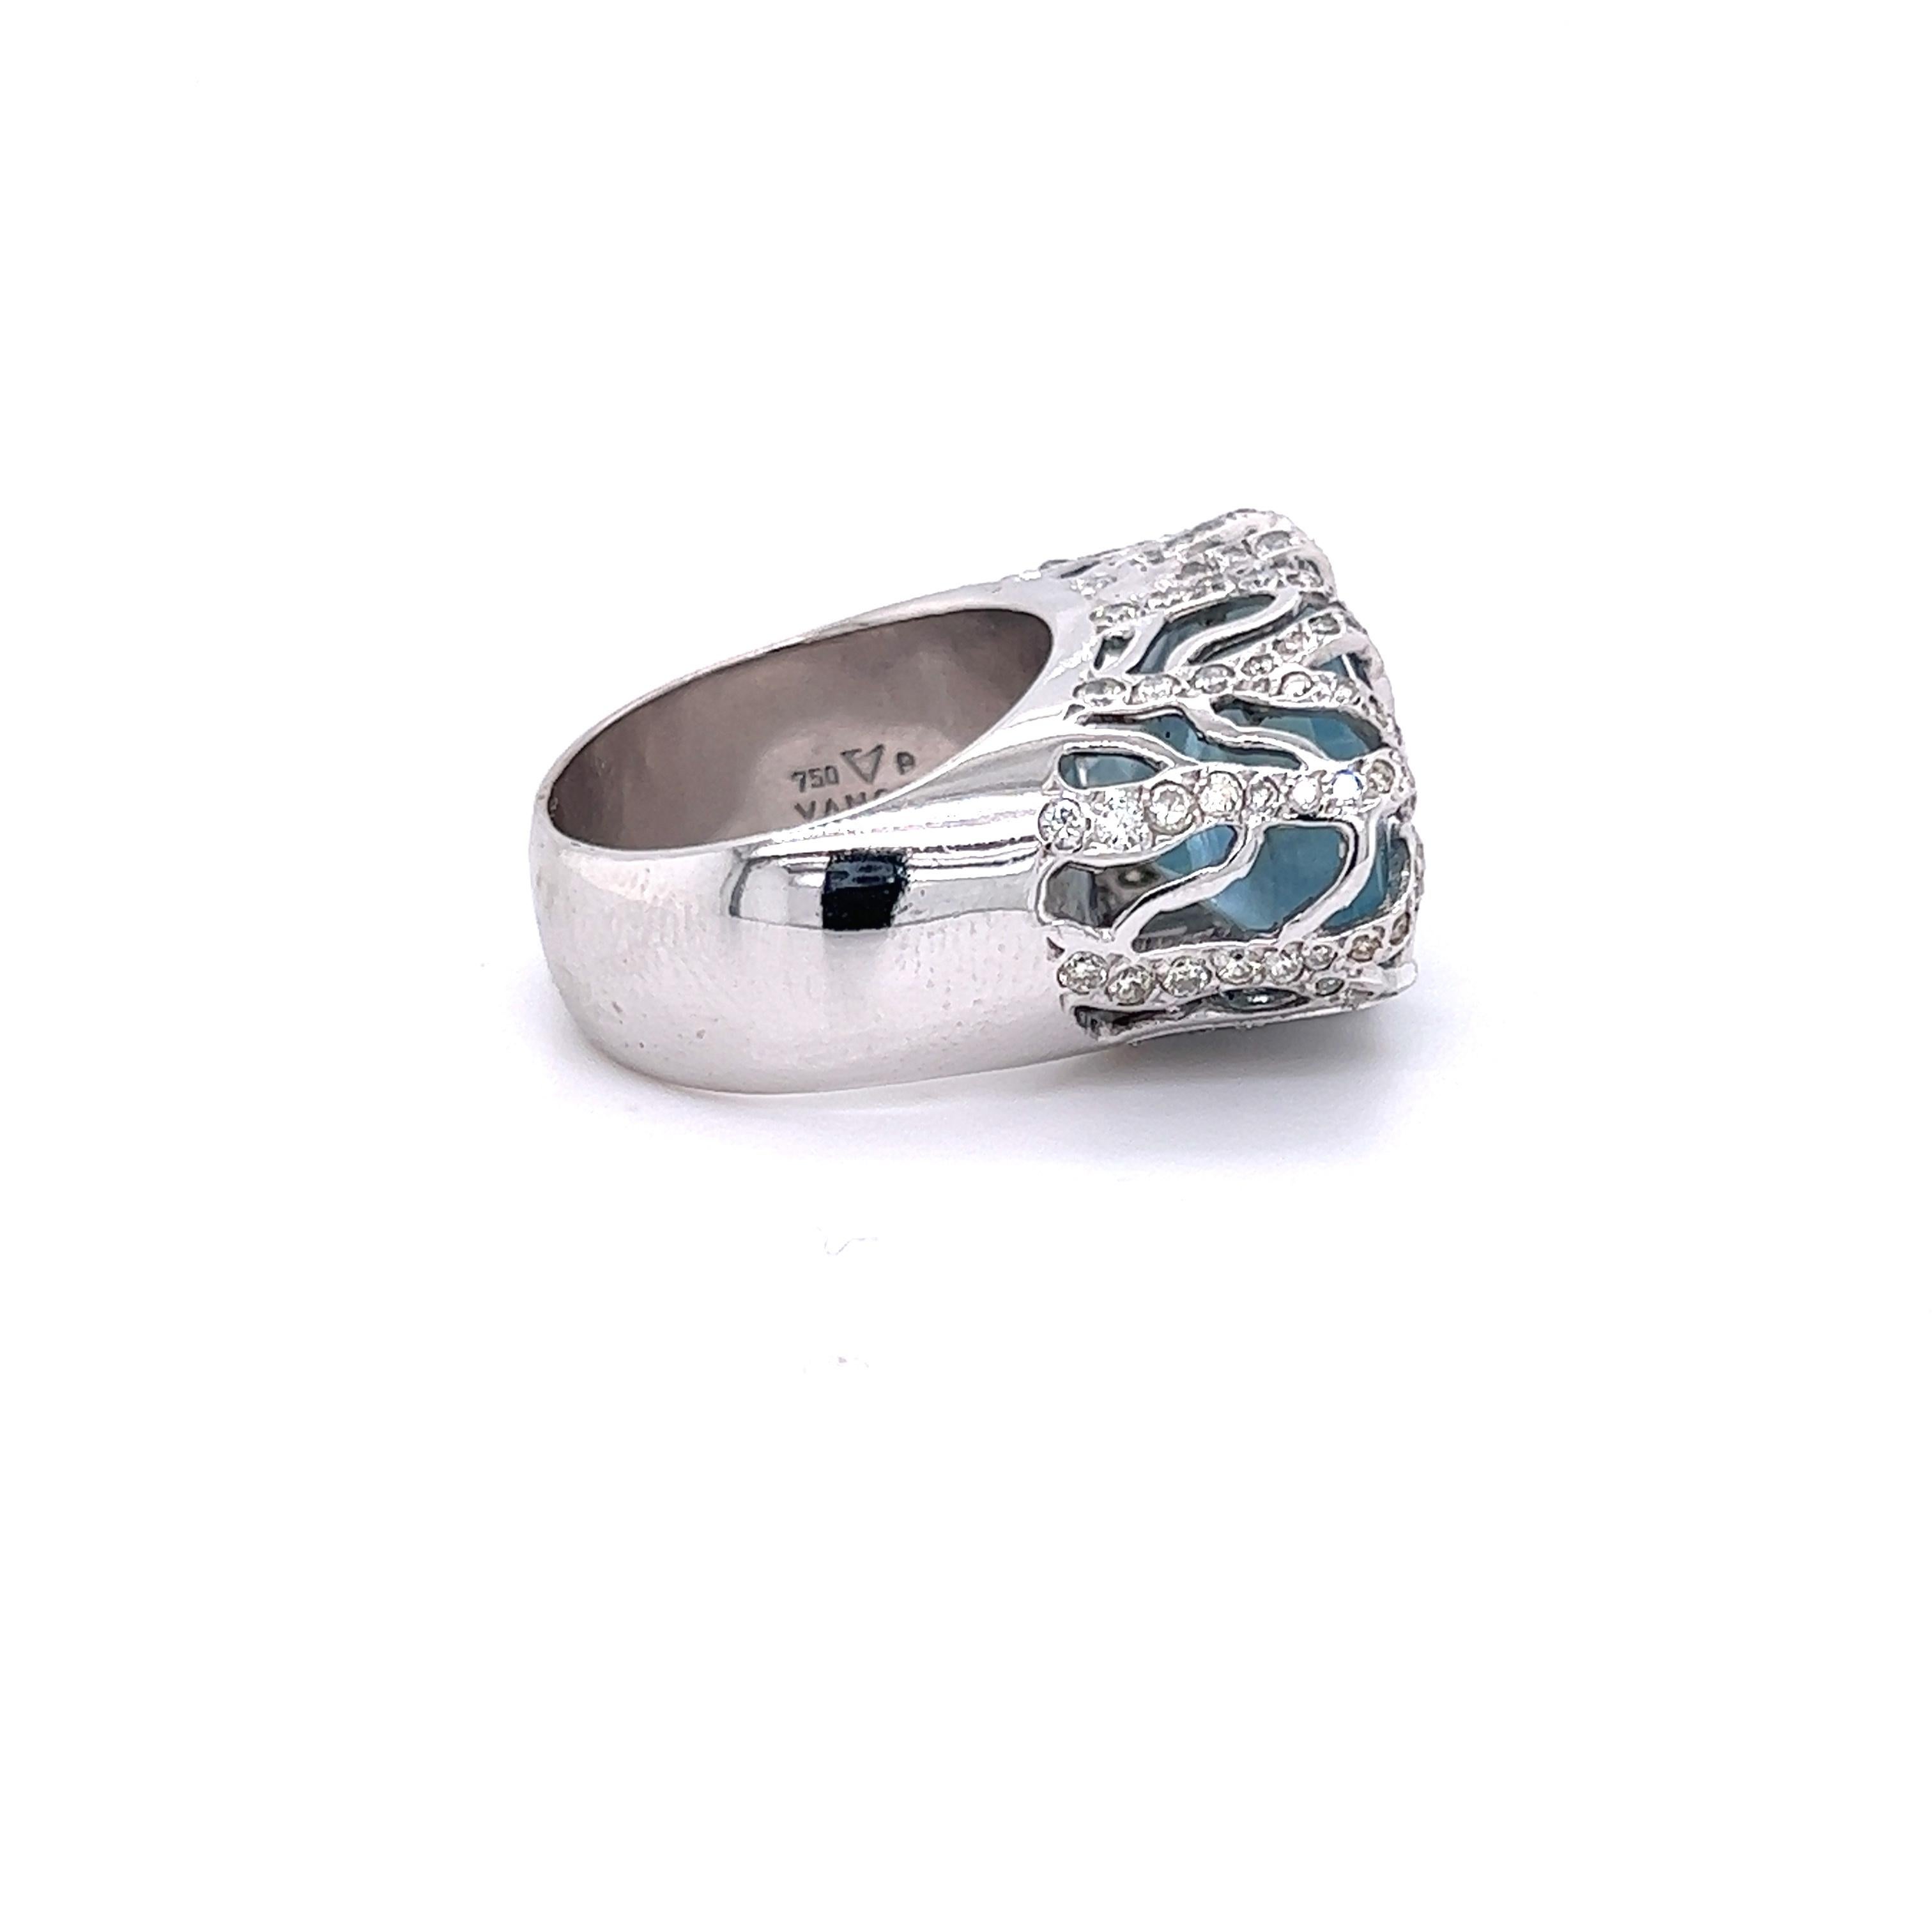 Vancox Designer 18K White Gold Diamond Cabochon Milky Aquamarine Cocktail Ring

This ring features a cabochon, oval cut Milky Aquamarine center with a natural inclusion running through the center.

Apprx. 1.10ct. diamonds total weight.

Ring face